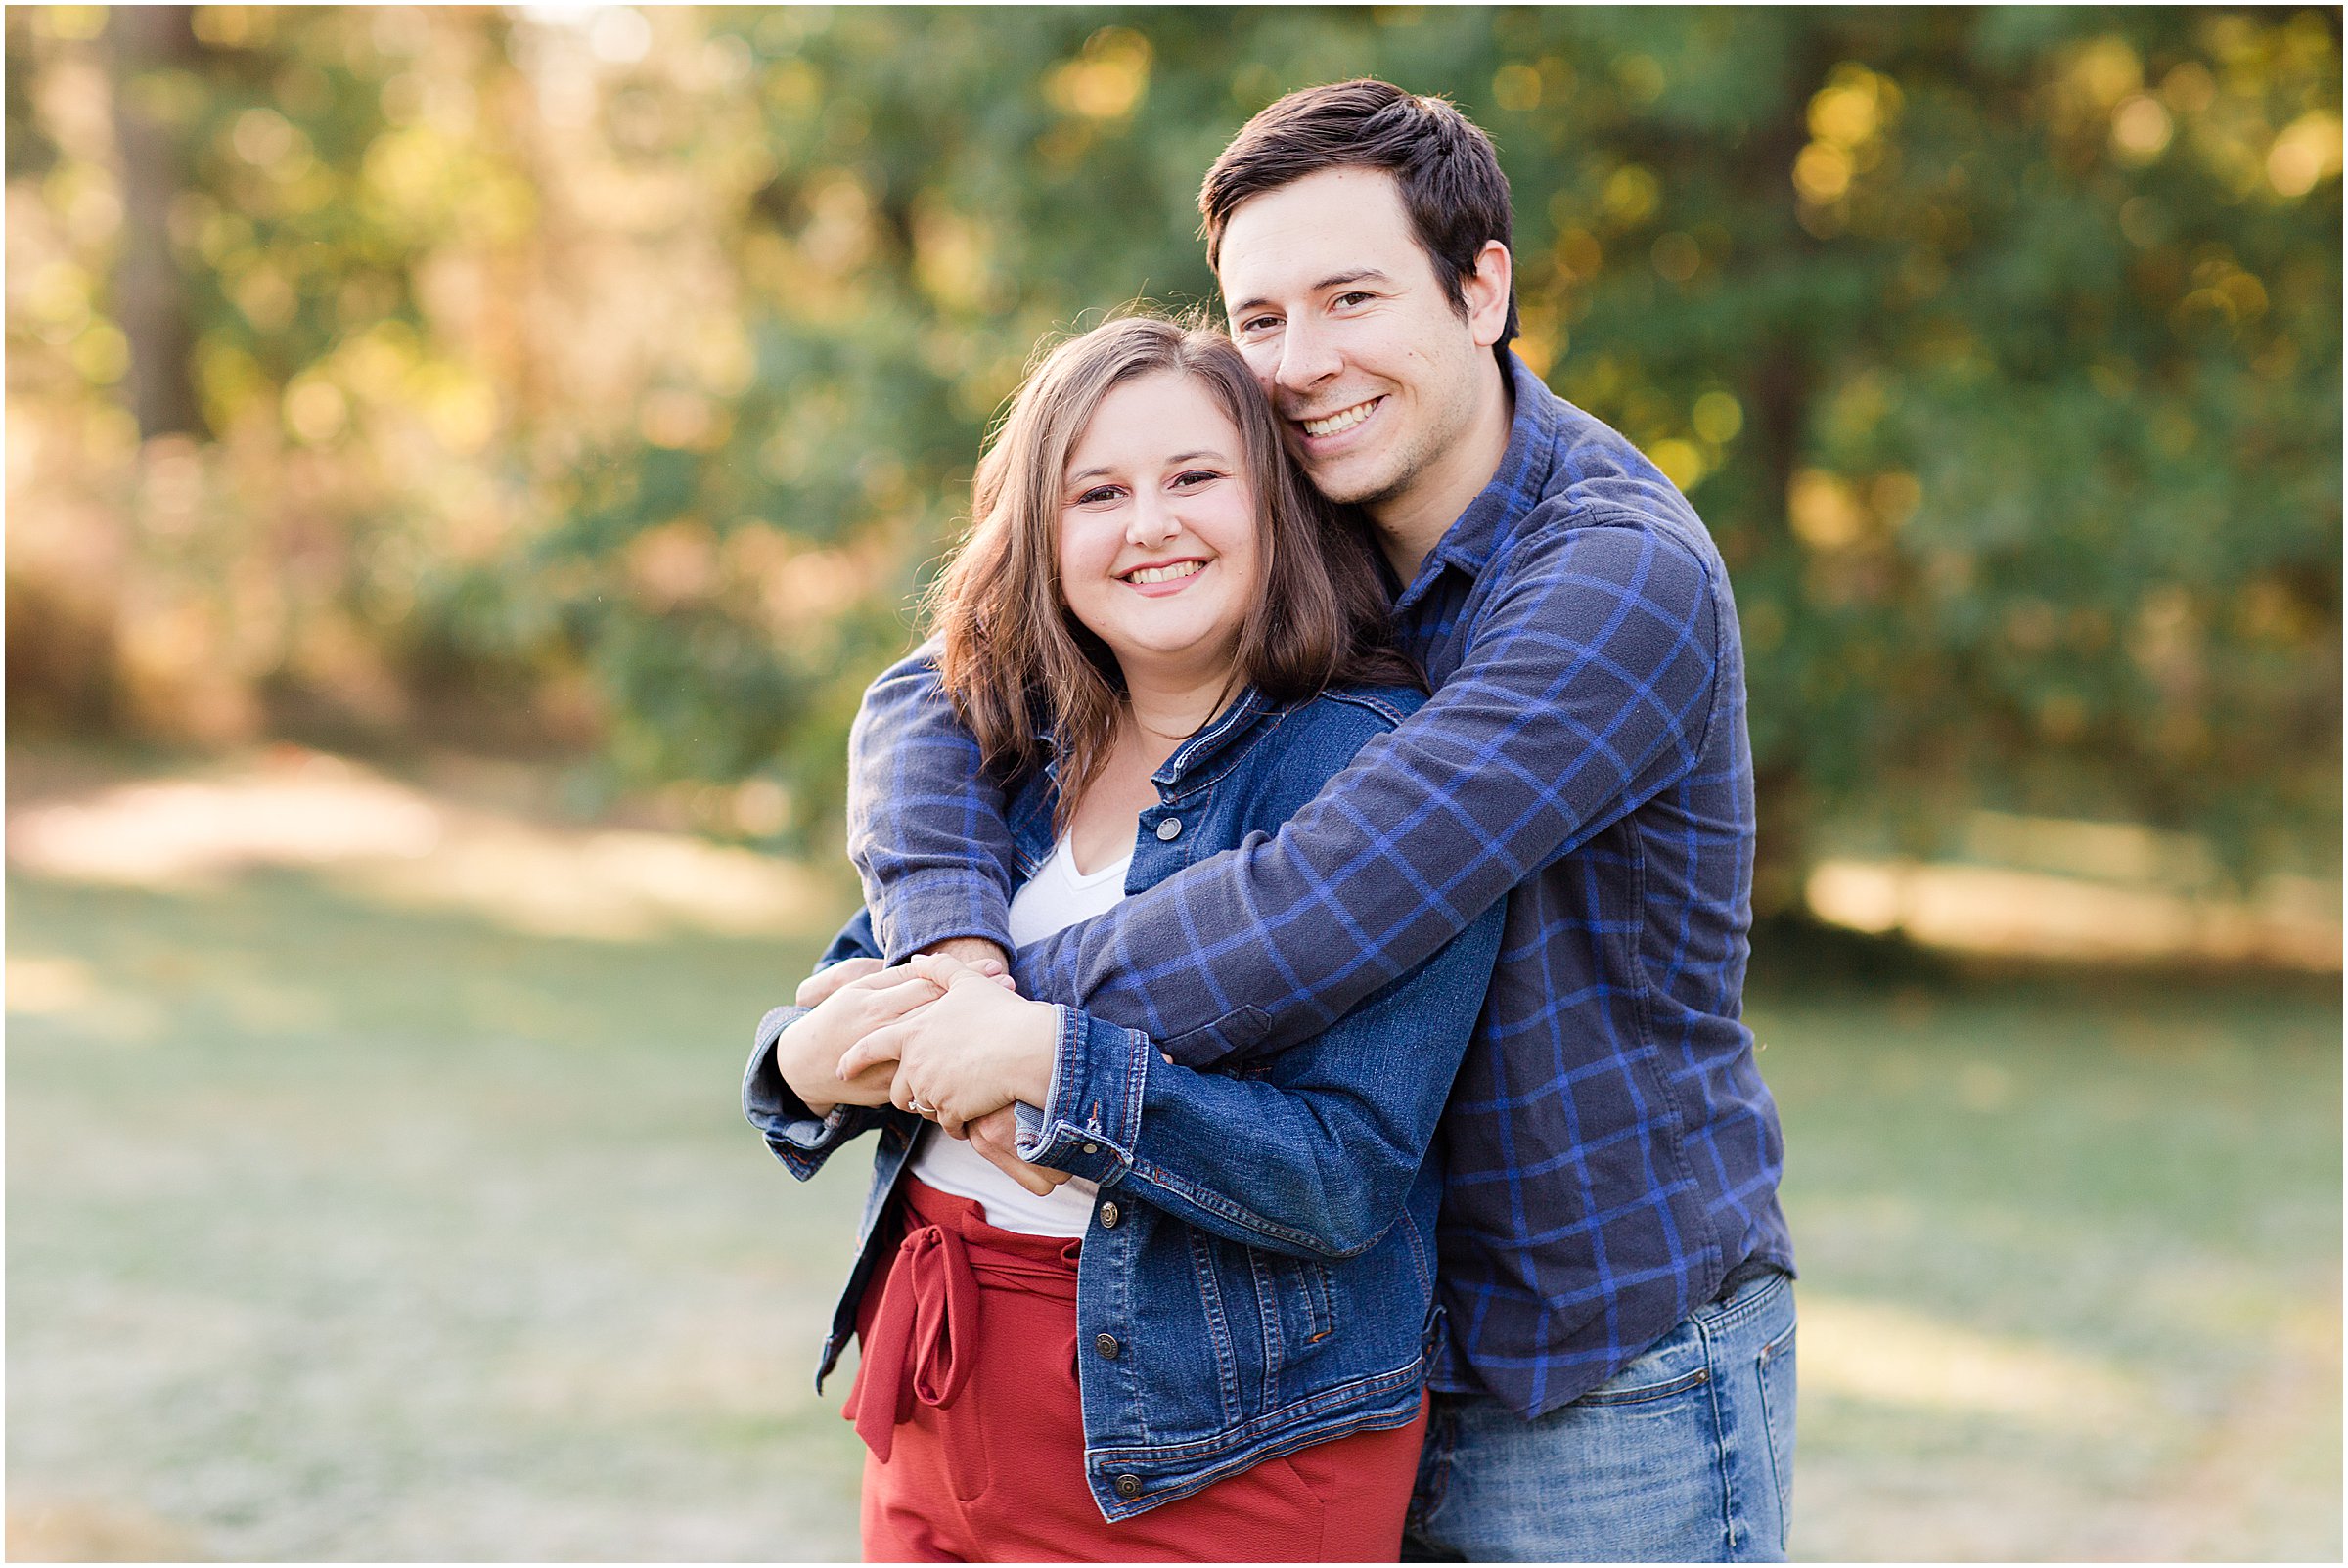 Holliday Park Engagement Session by Sami Renee_0005.jpg